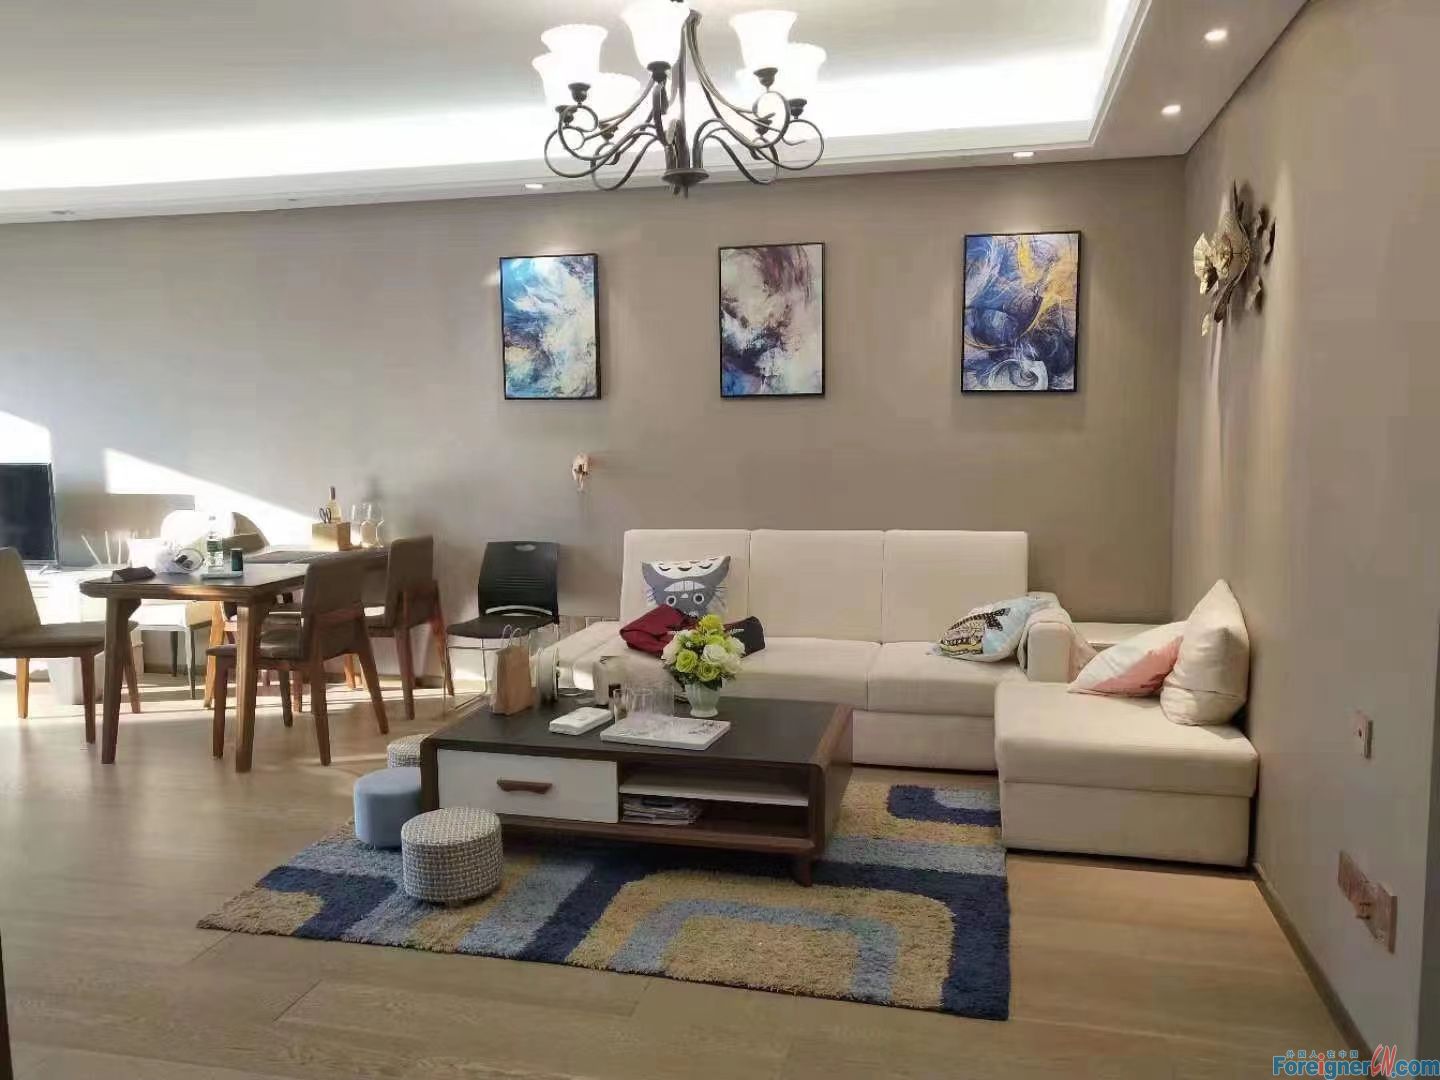  Terrific！！！ HLCC apartment rent in Suzhou/1 bedroom and 1 bathroom/,central AC, floor heating/CBD of east Jinji lake/close to Times Square and subway line1